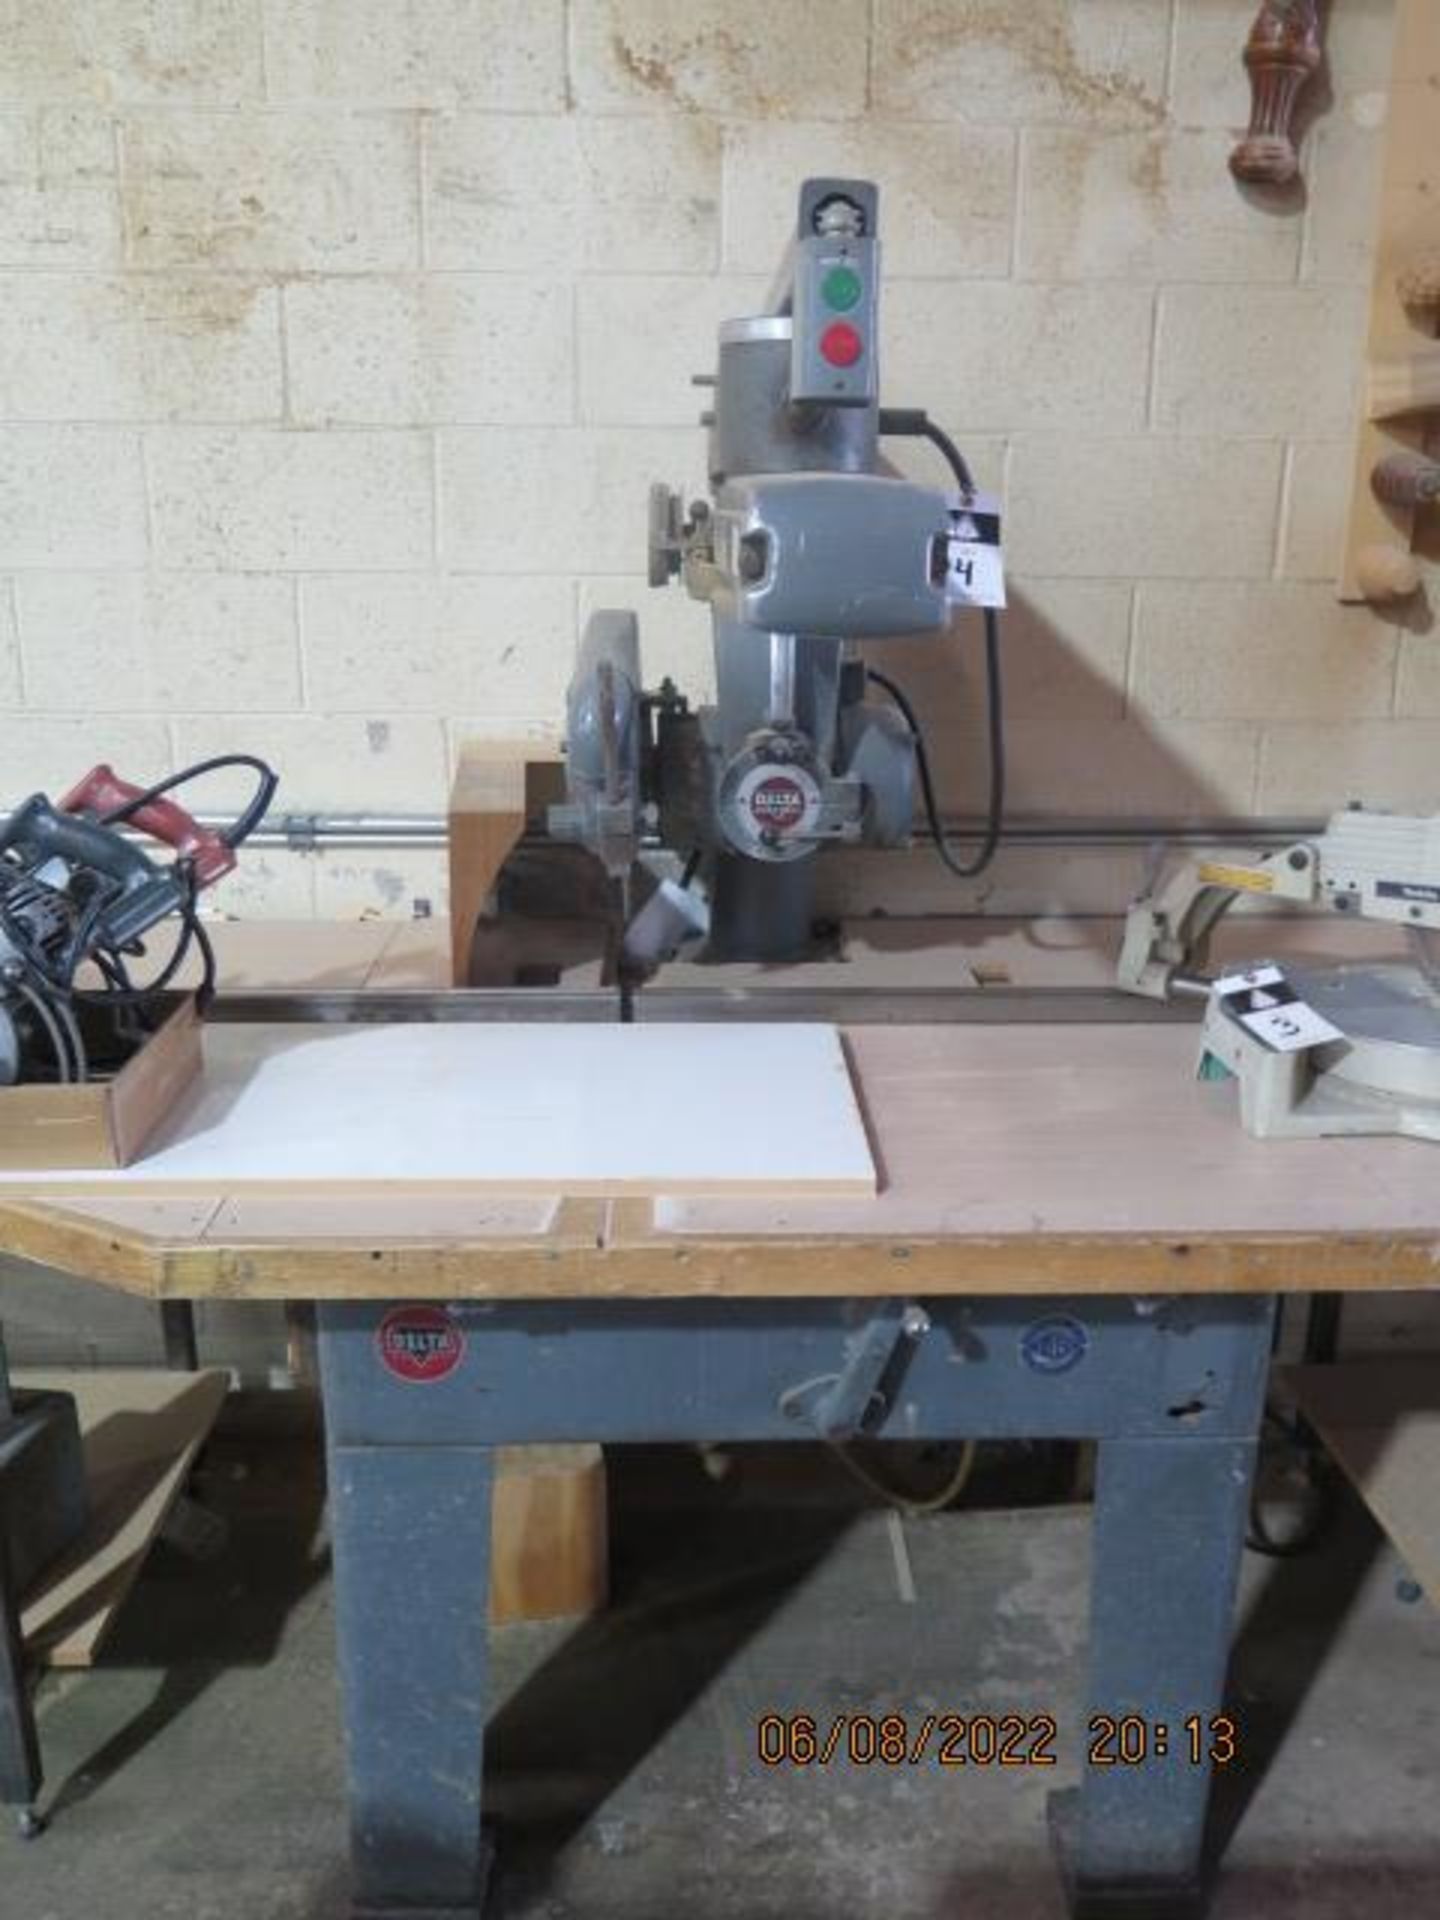 Delta mdl. 50-C Radial Arm Saw s/n CW6569 w/ 14’ Extended Table (SOLD AS-IS - NO WARRANTY)